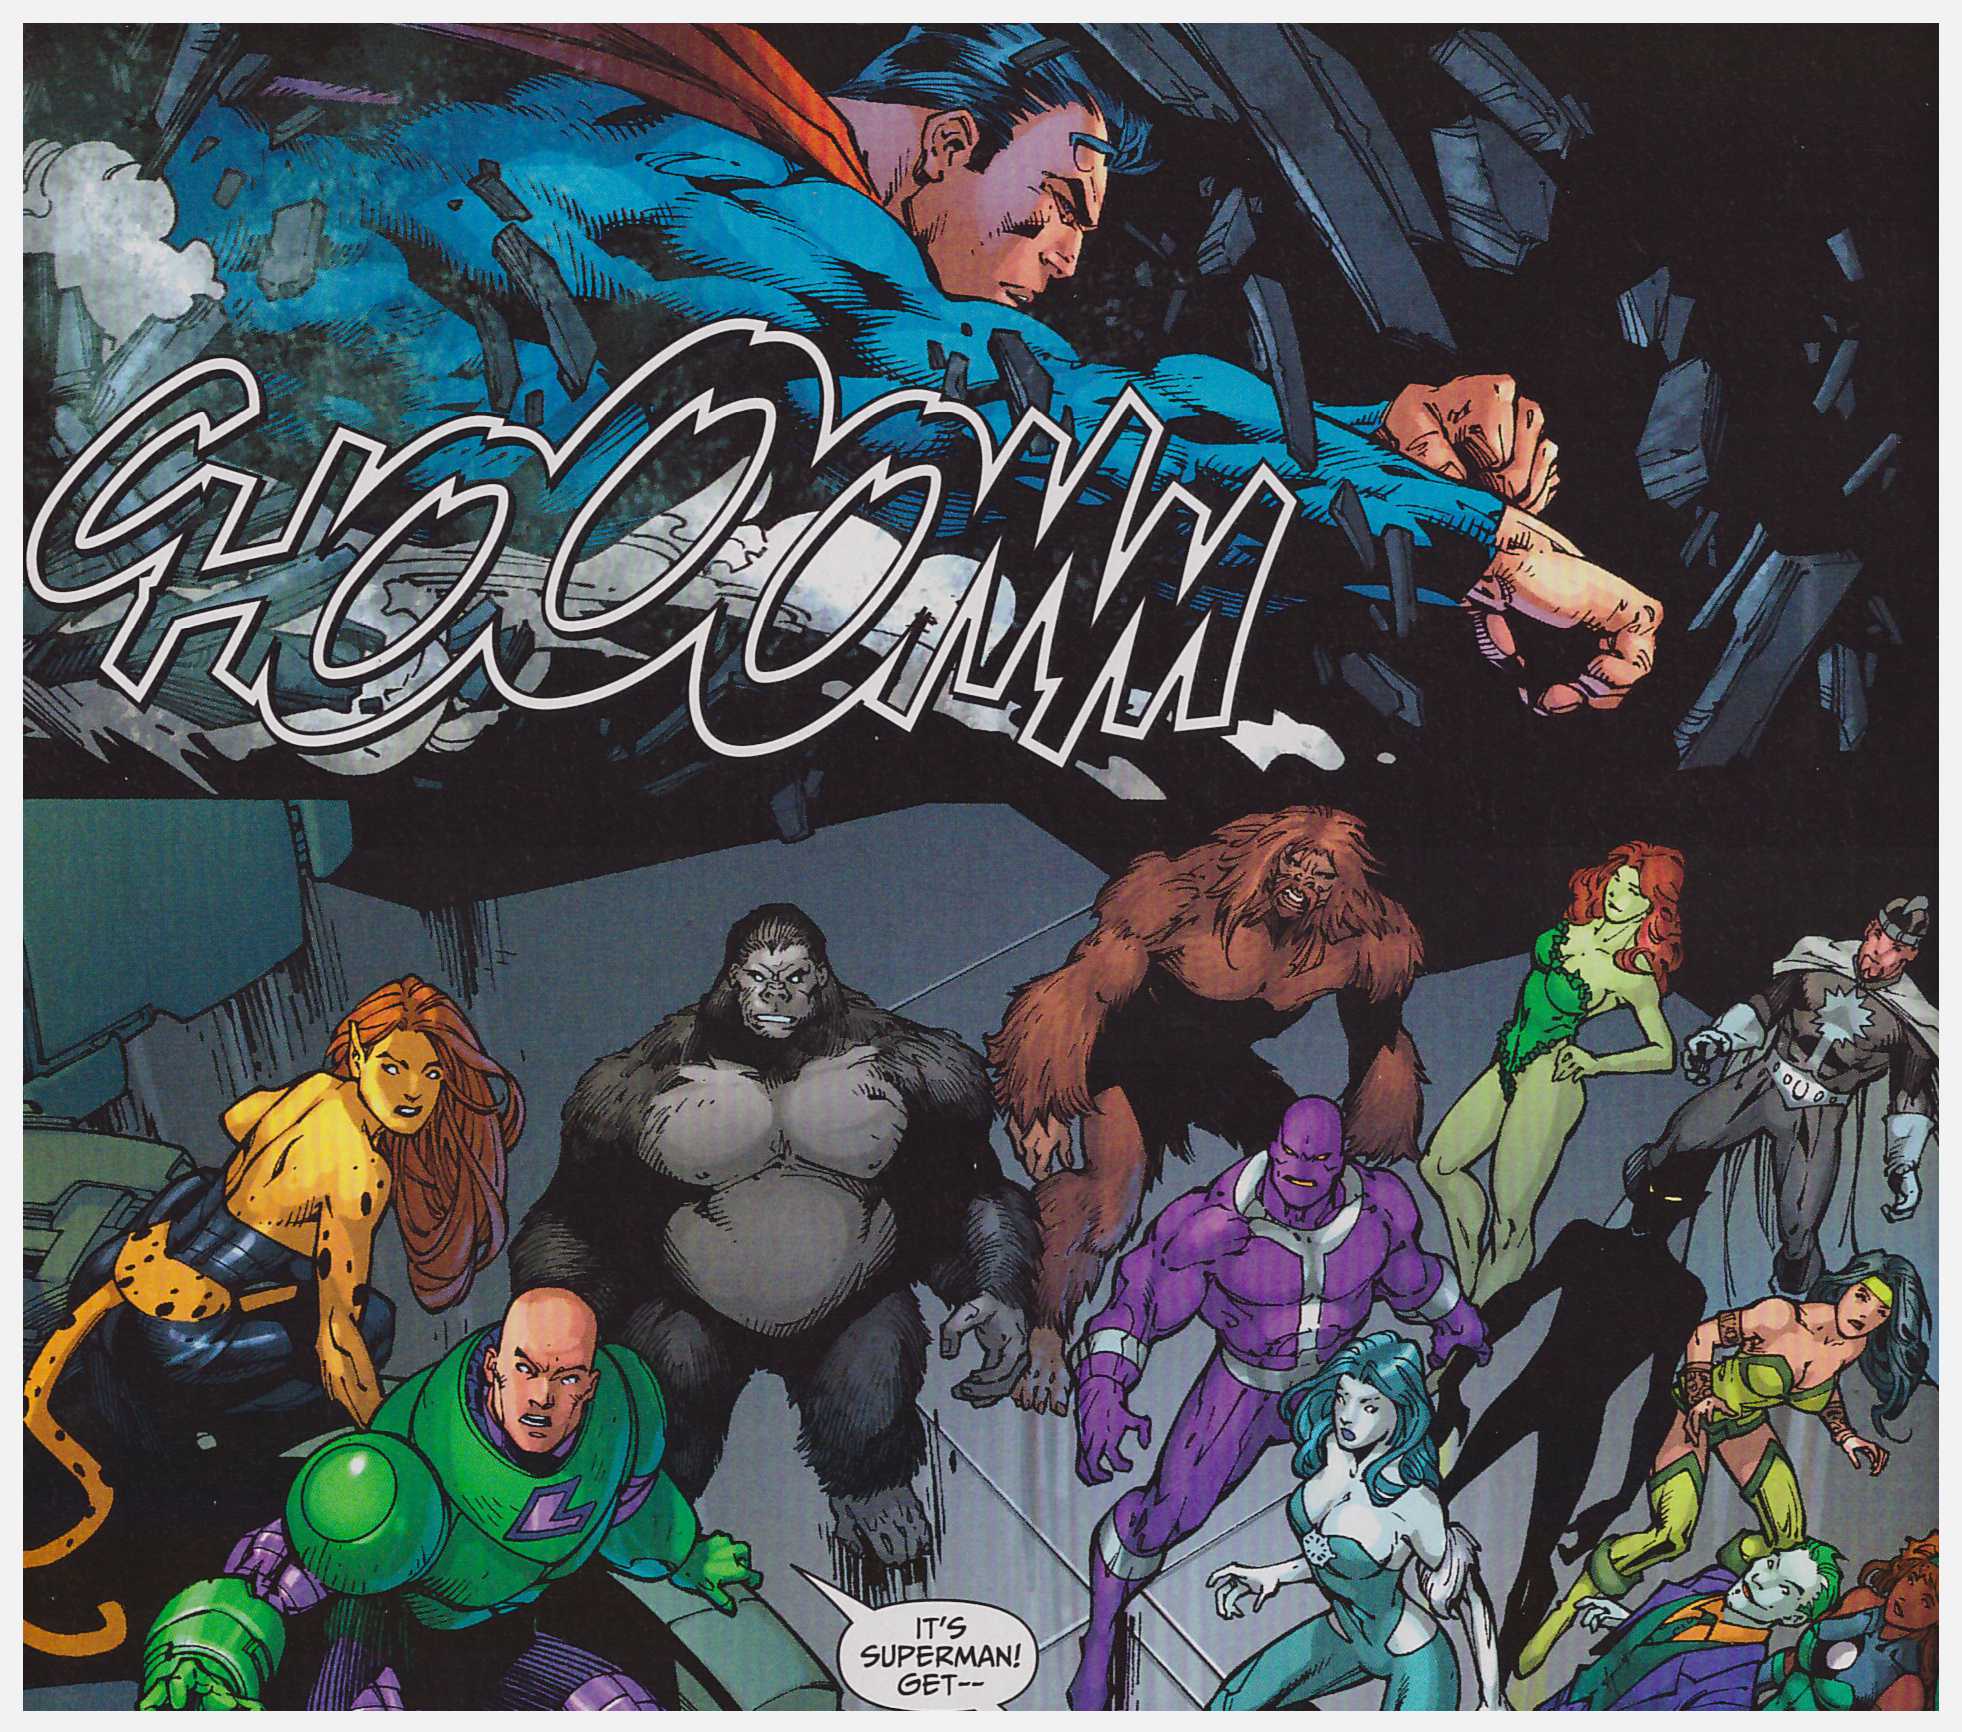 Justice League of America: The Injustice League review